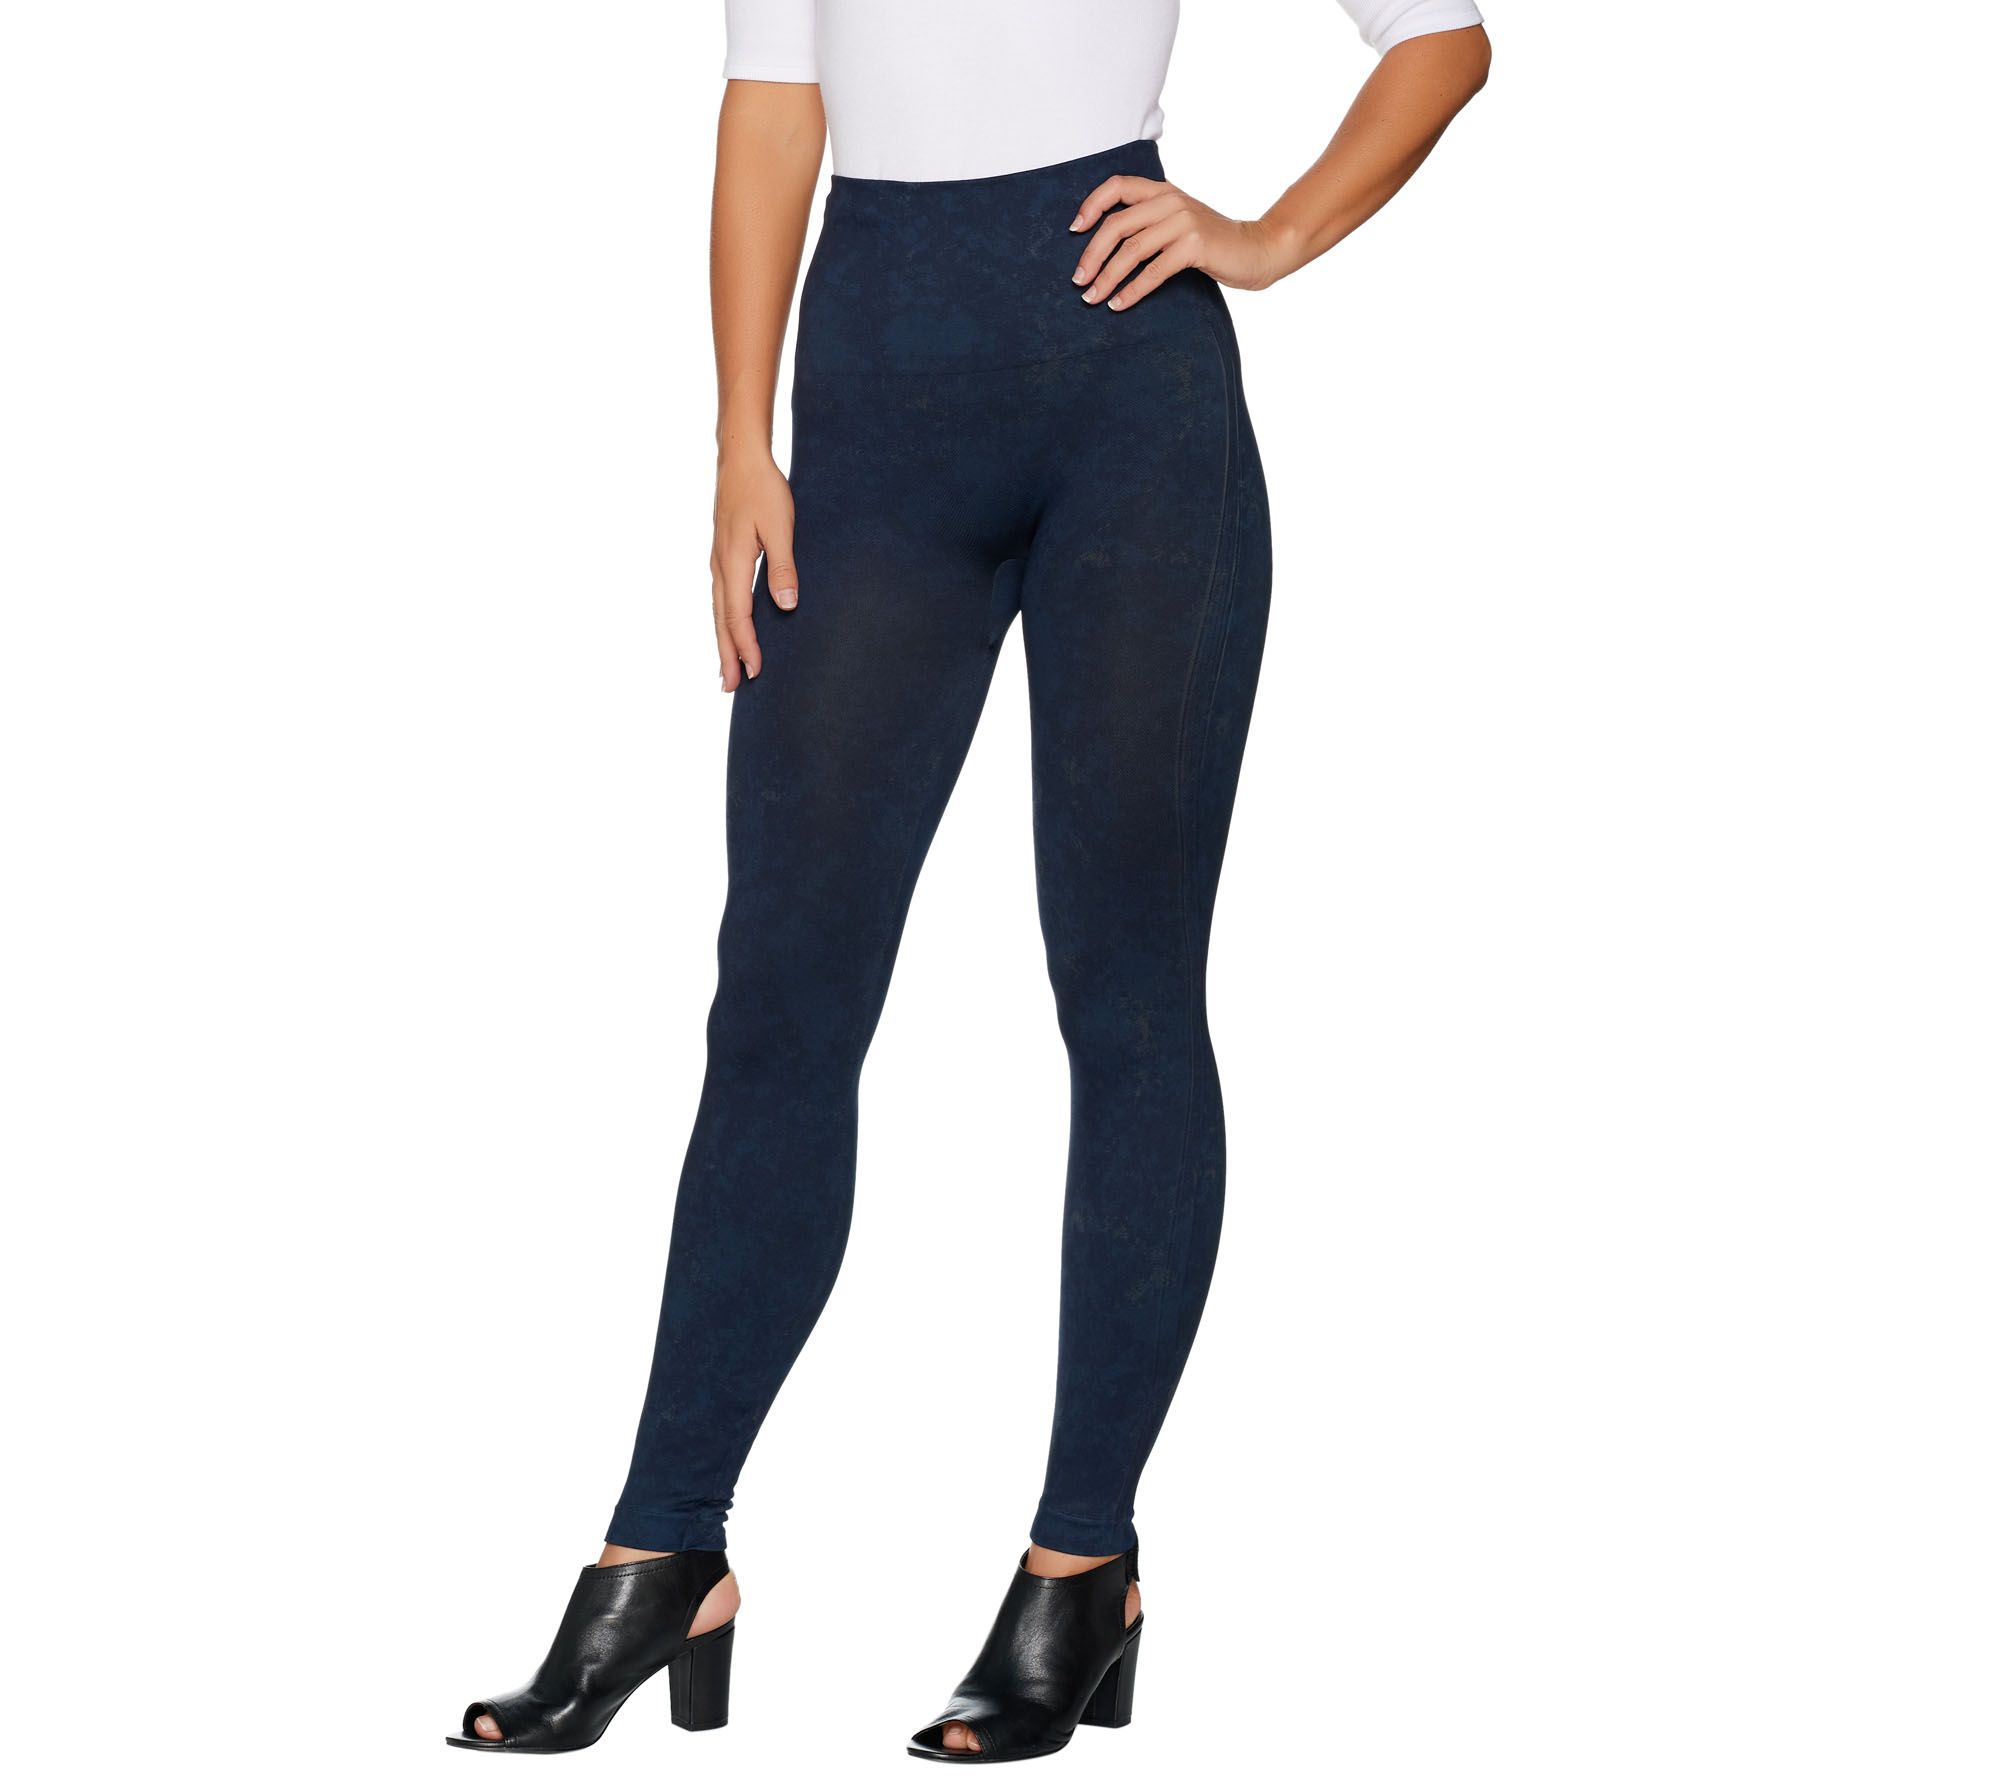 Spanx Port Navy Blue High Waist Look at me Now Seamless Leggings New Shaper